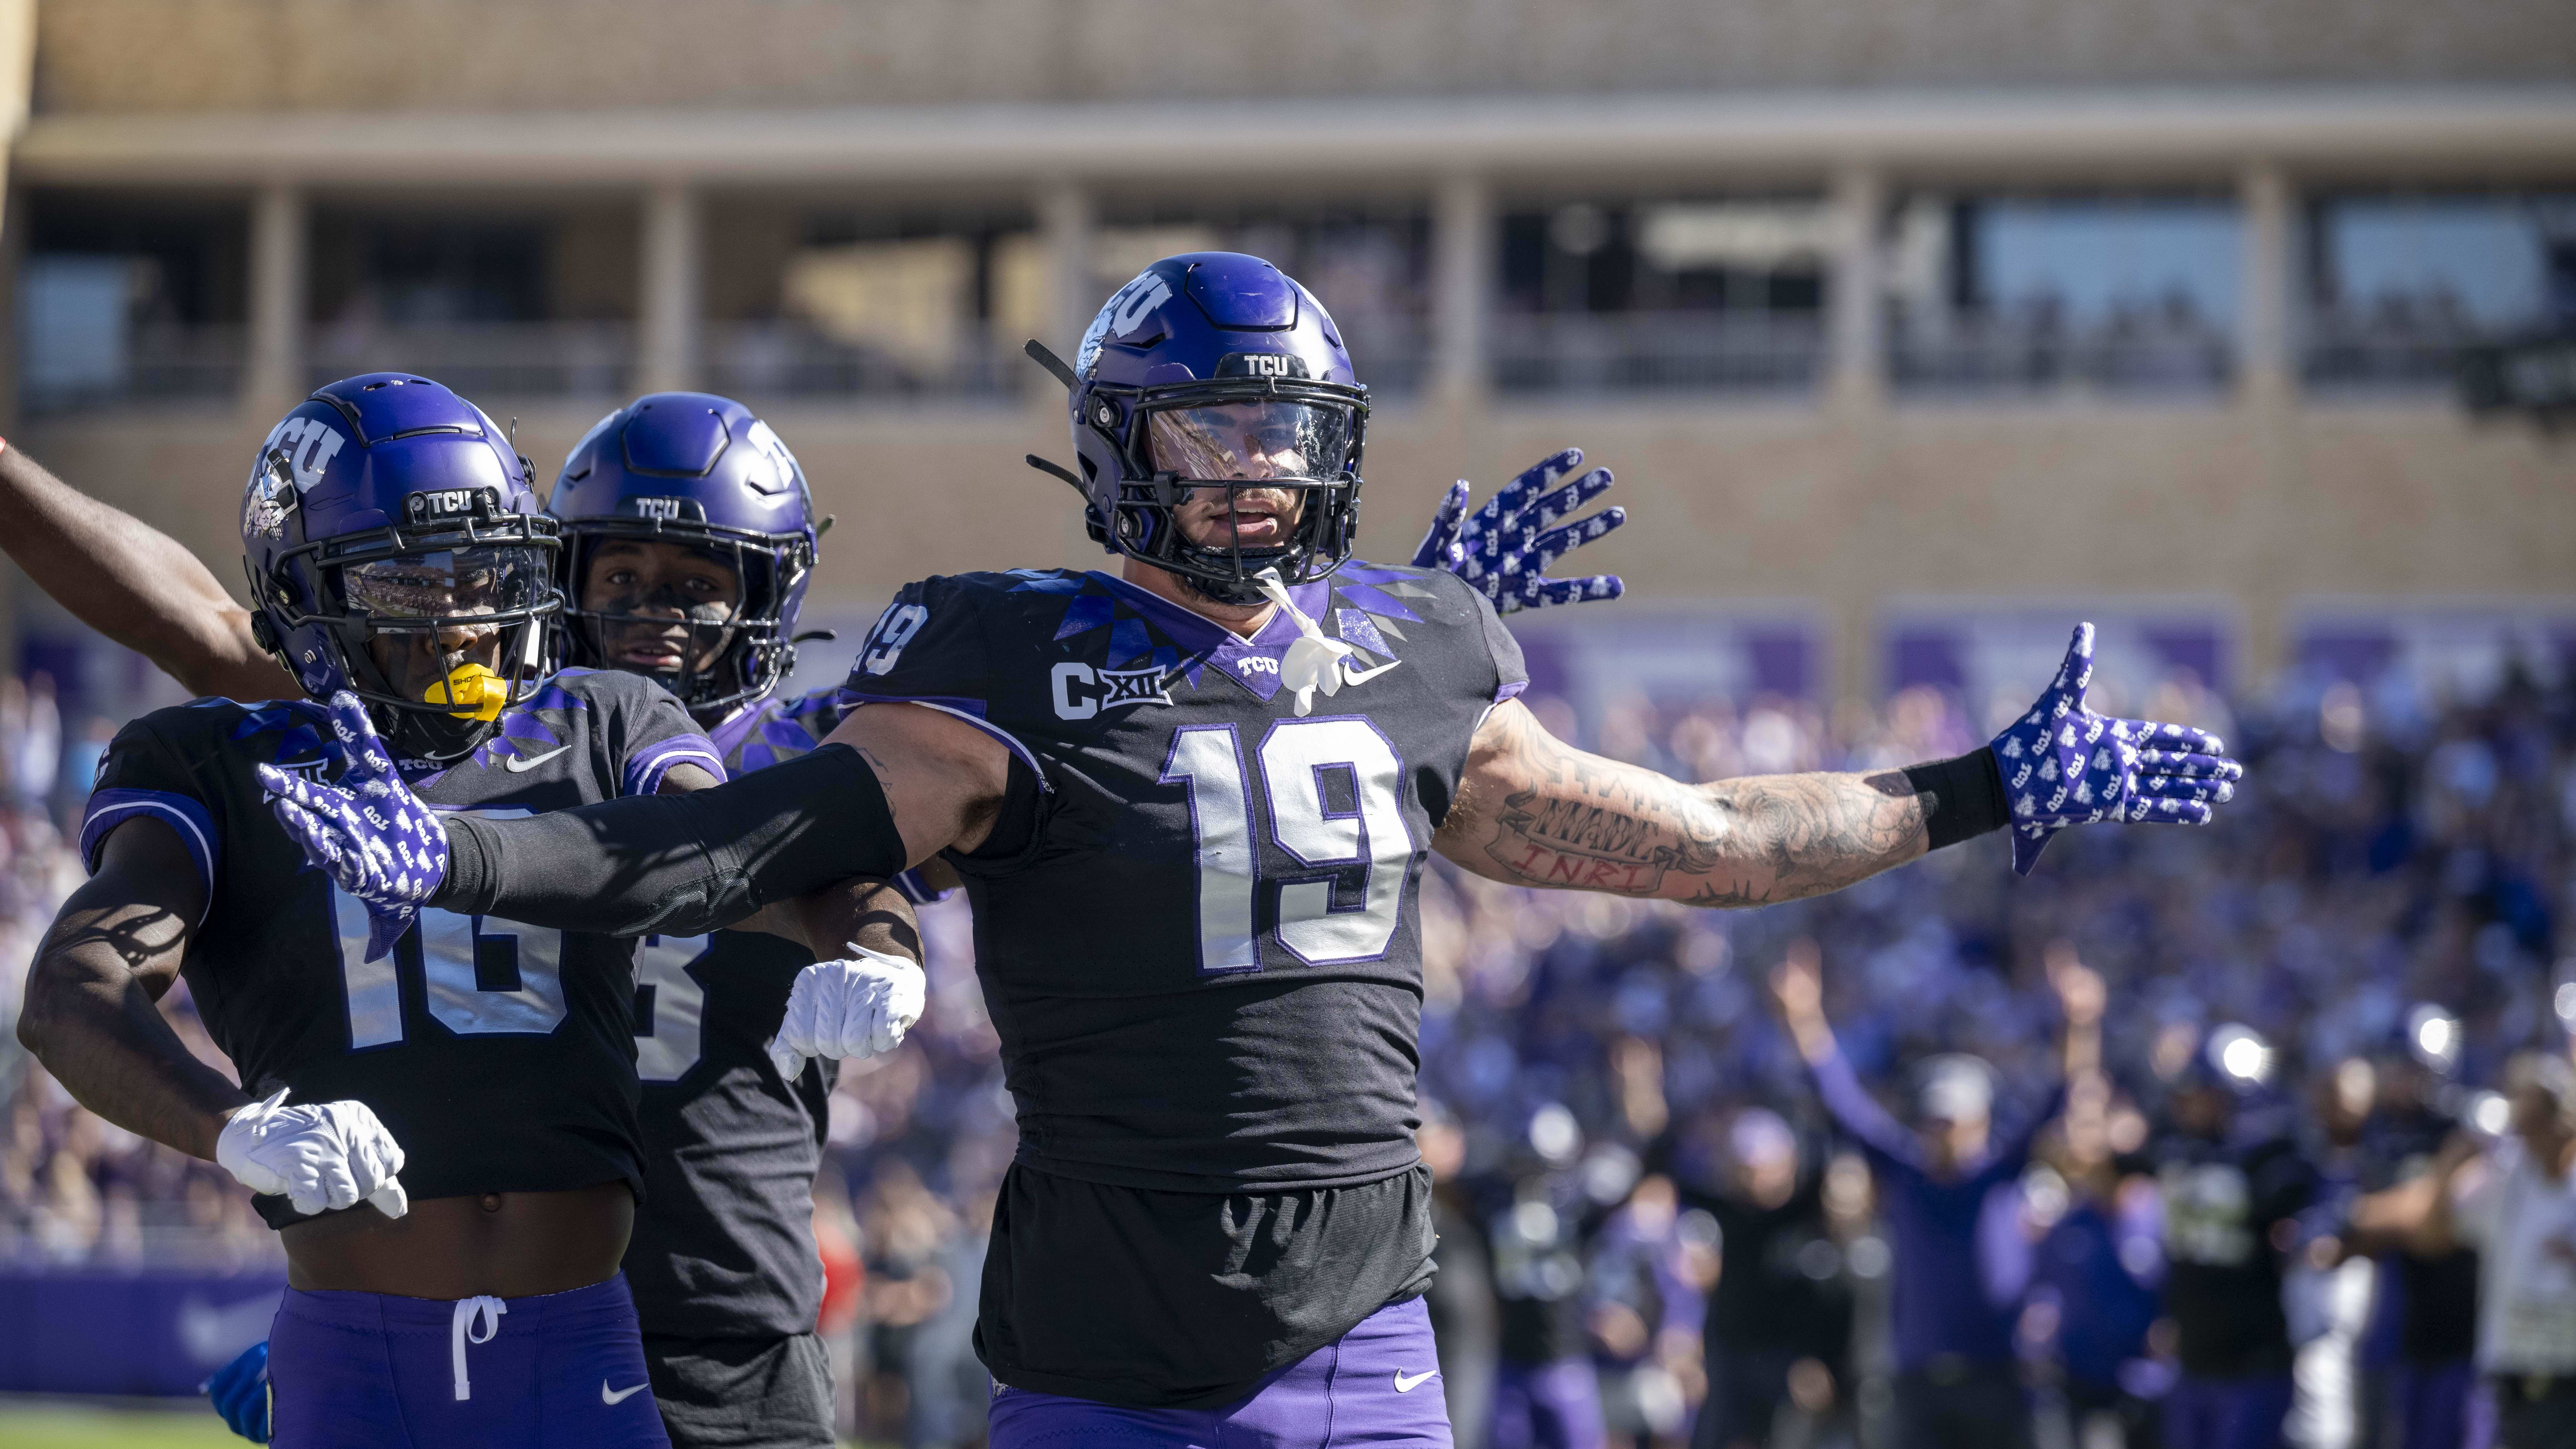 Chiefs Select TCU TE Jared Wiley with No. 131 Overall Pick